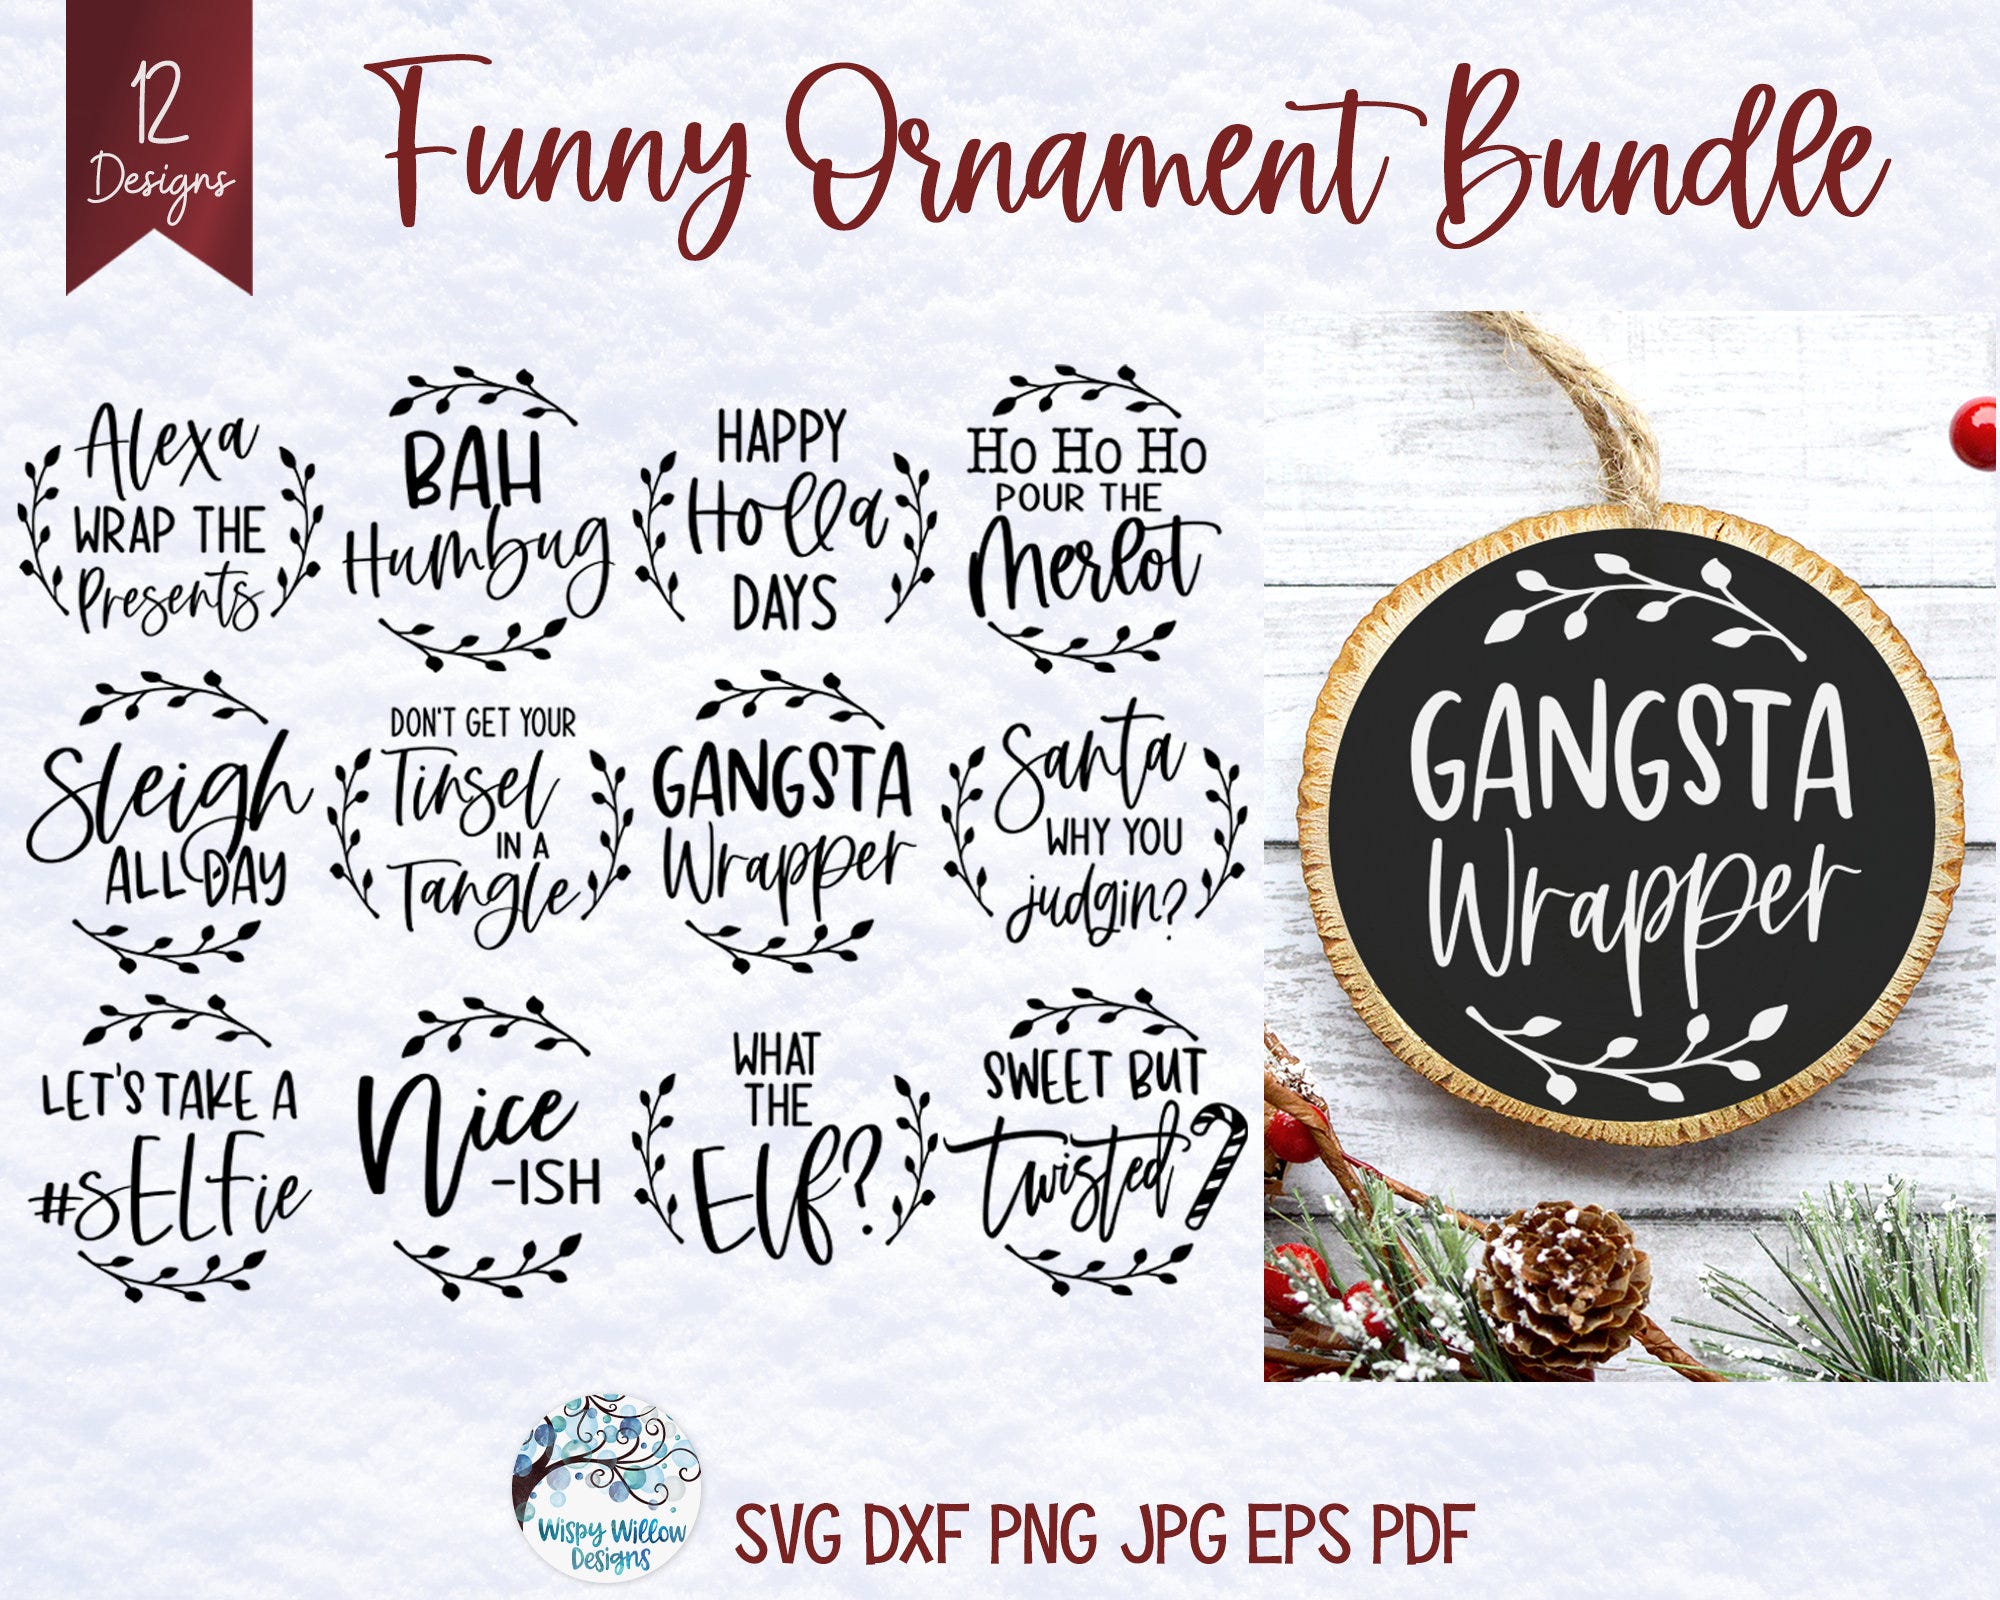 Funny Christmas Ornament SVG Bundle, Funny Christmas Svg, Gangsta Wrapper, Alexa Wrap the Presents, Sleigh All Day, Santa Why You Judgin PNG